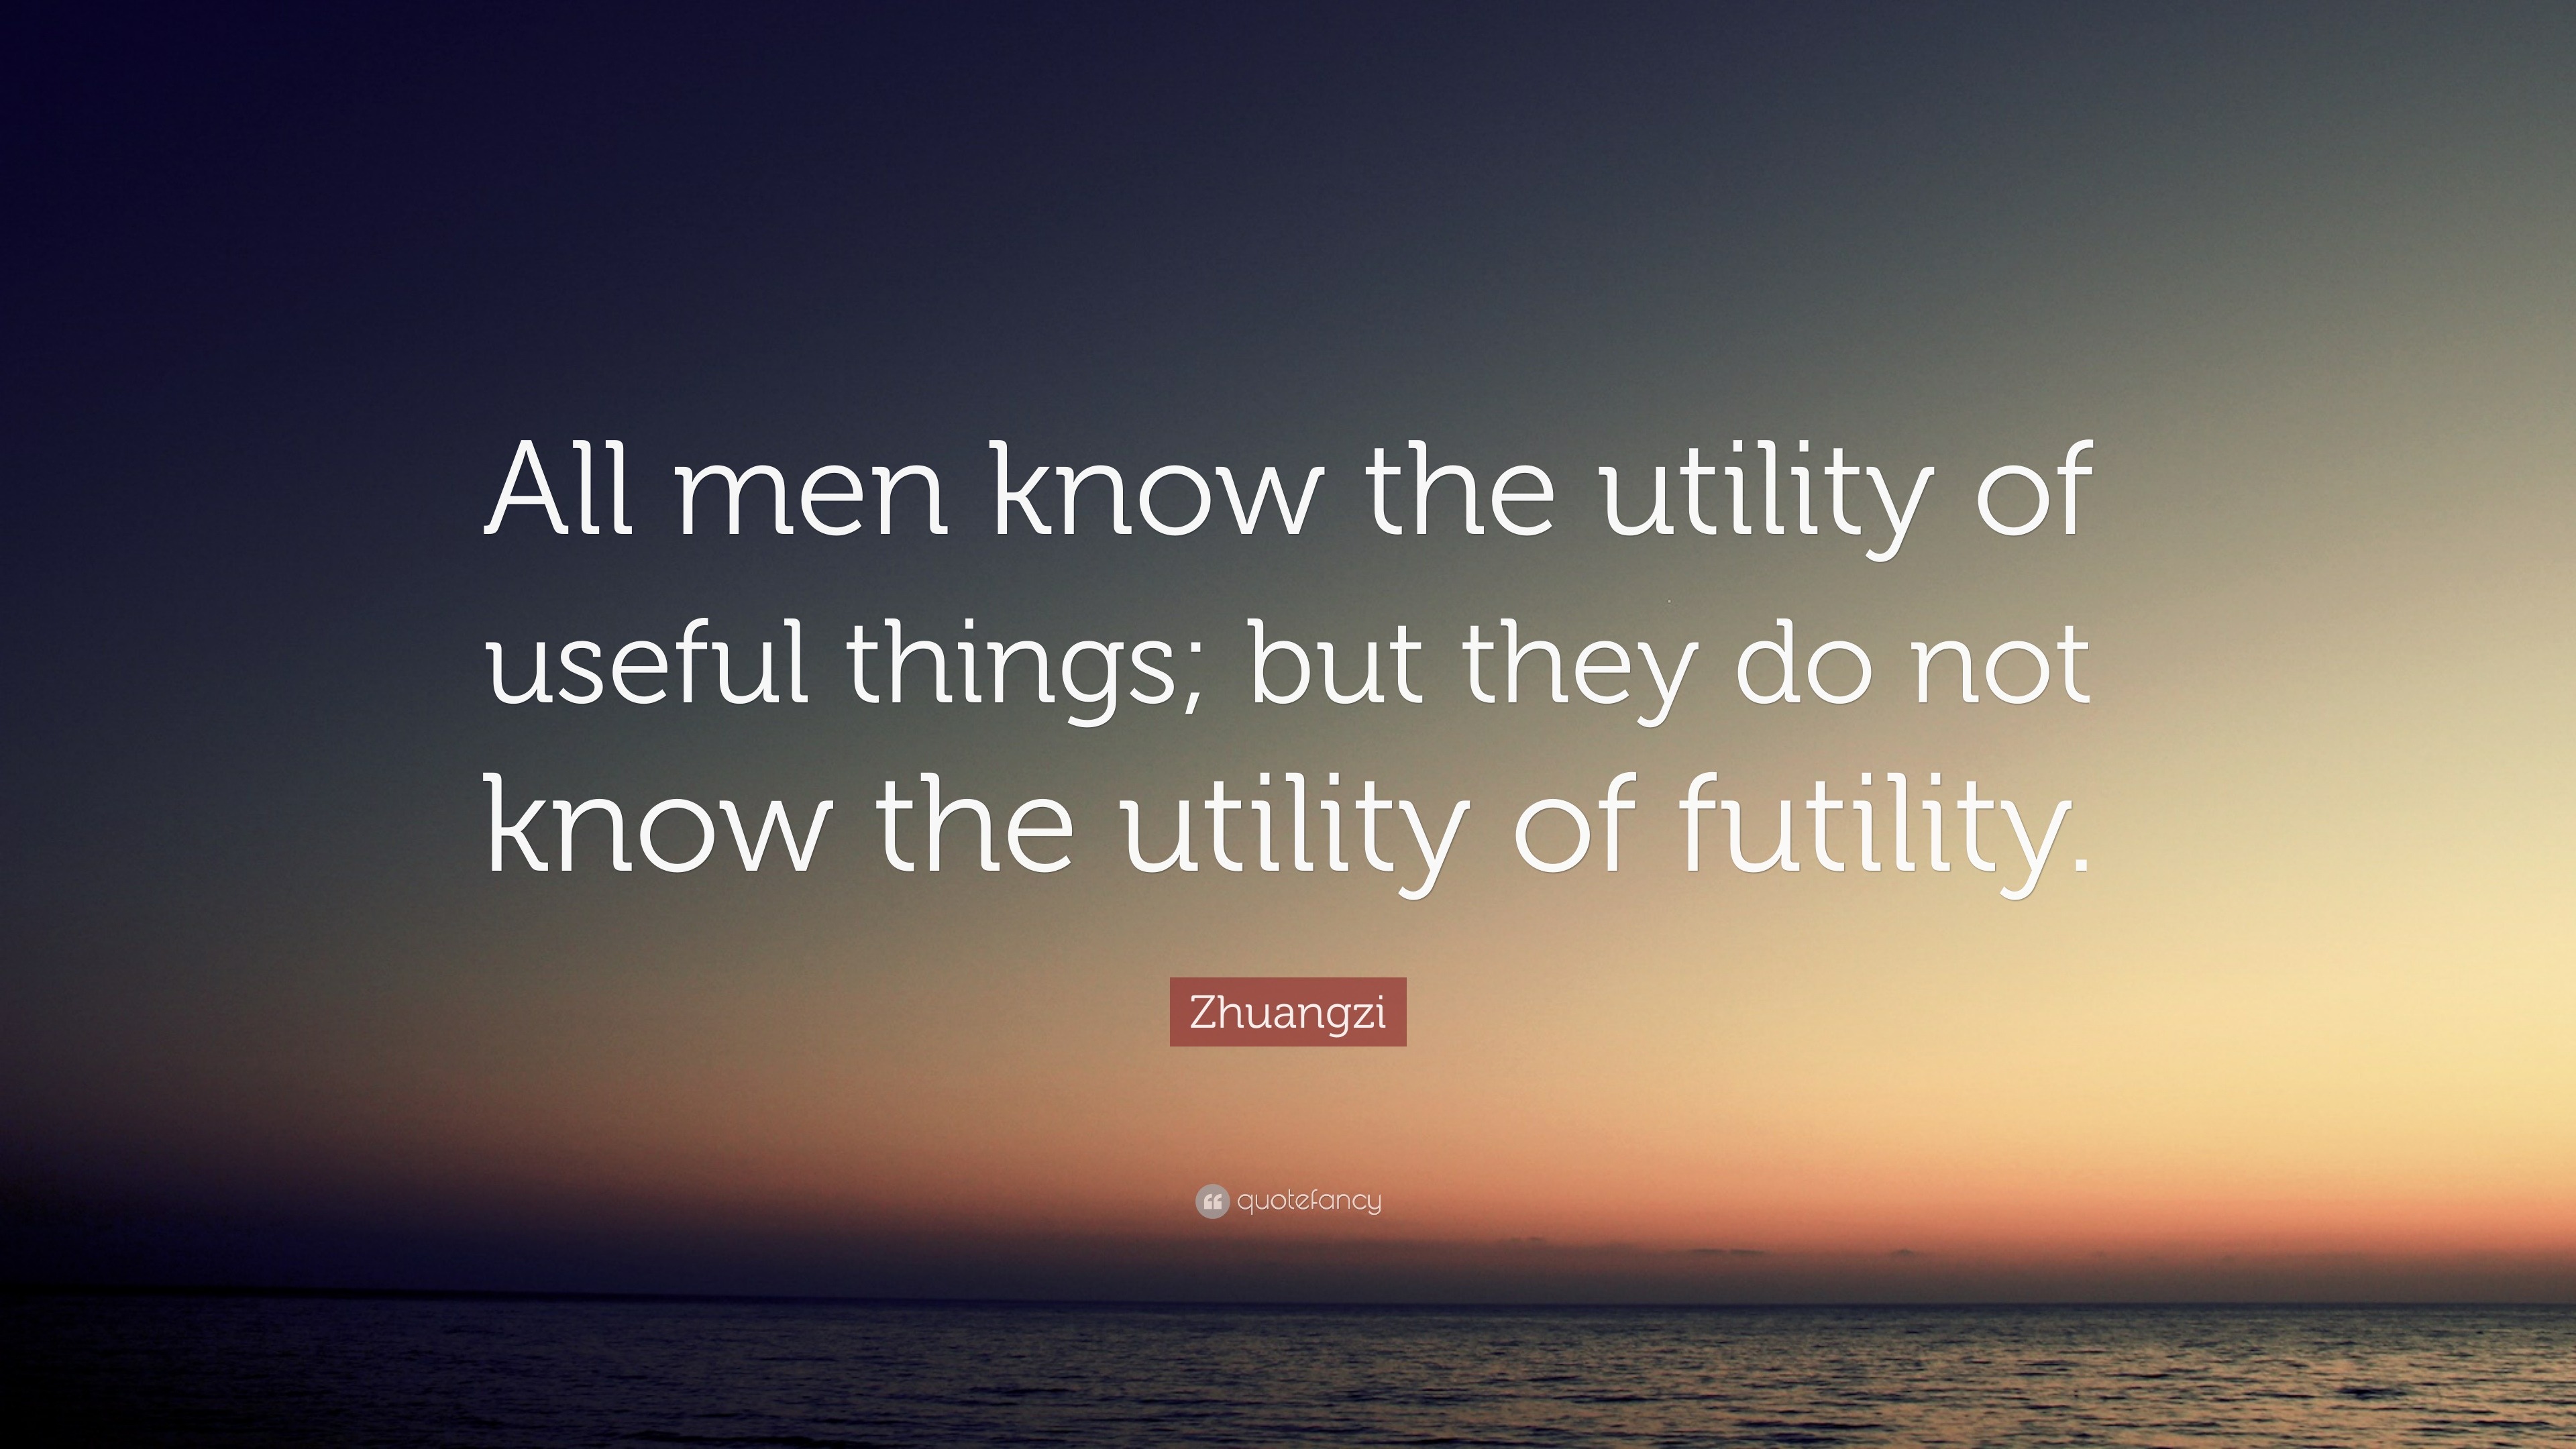 Zhuangzi Quote: “All men know the utility of useful things; but